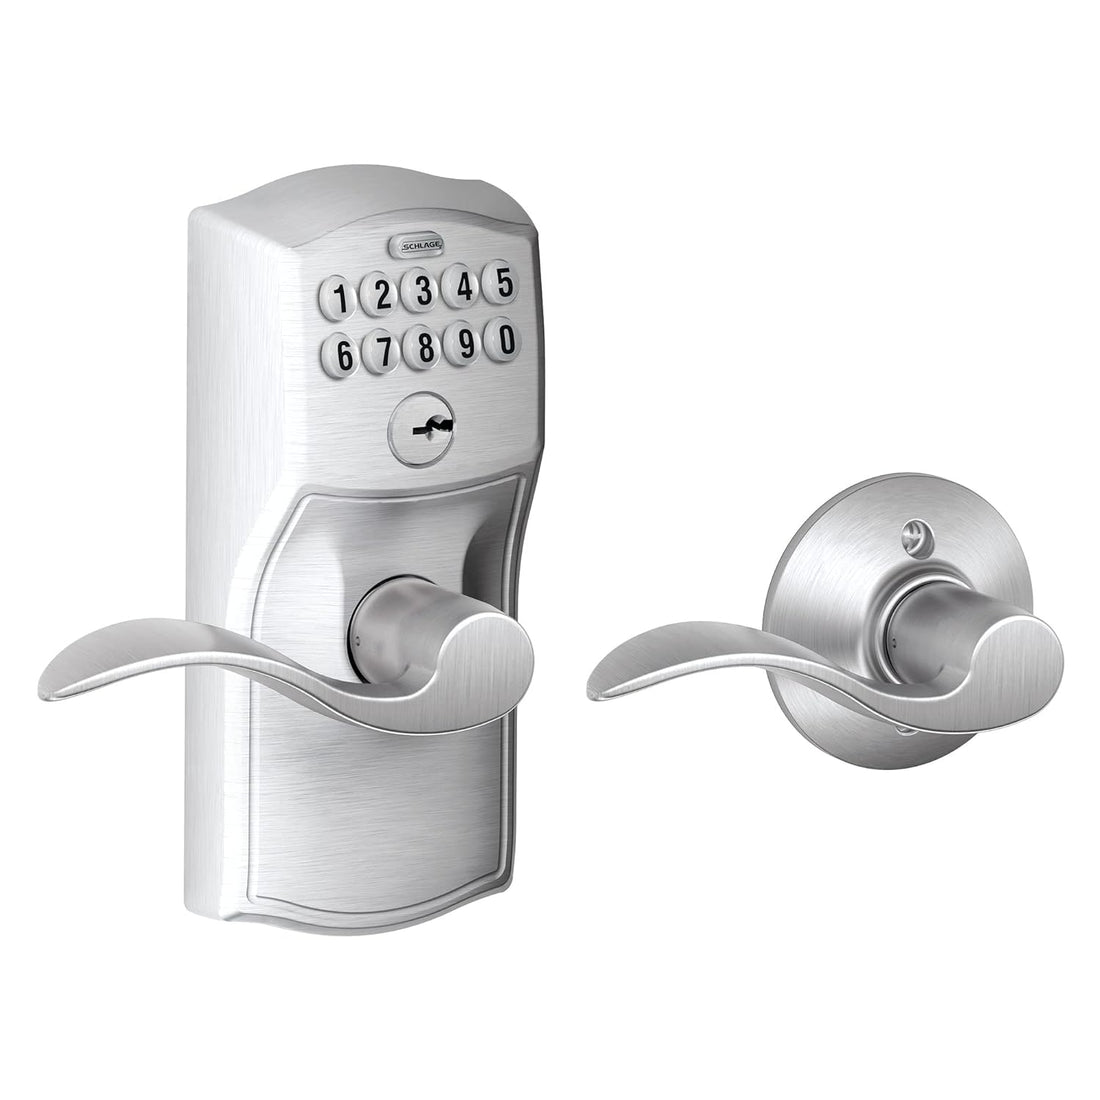 Schlage FE575 CAM 626 Acc Camelot Keypad Entry with Auto-Lock and Accent Levers, Brushed Chrome